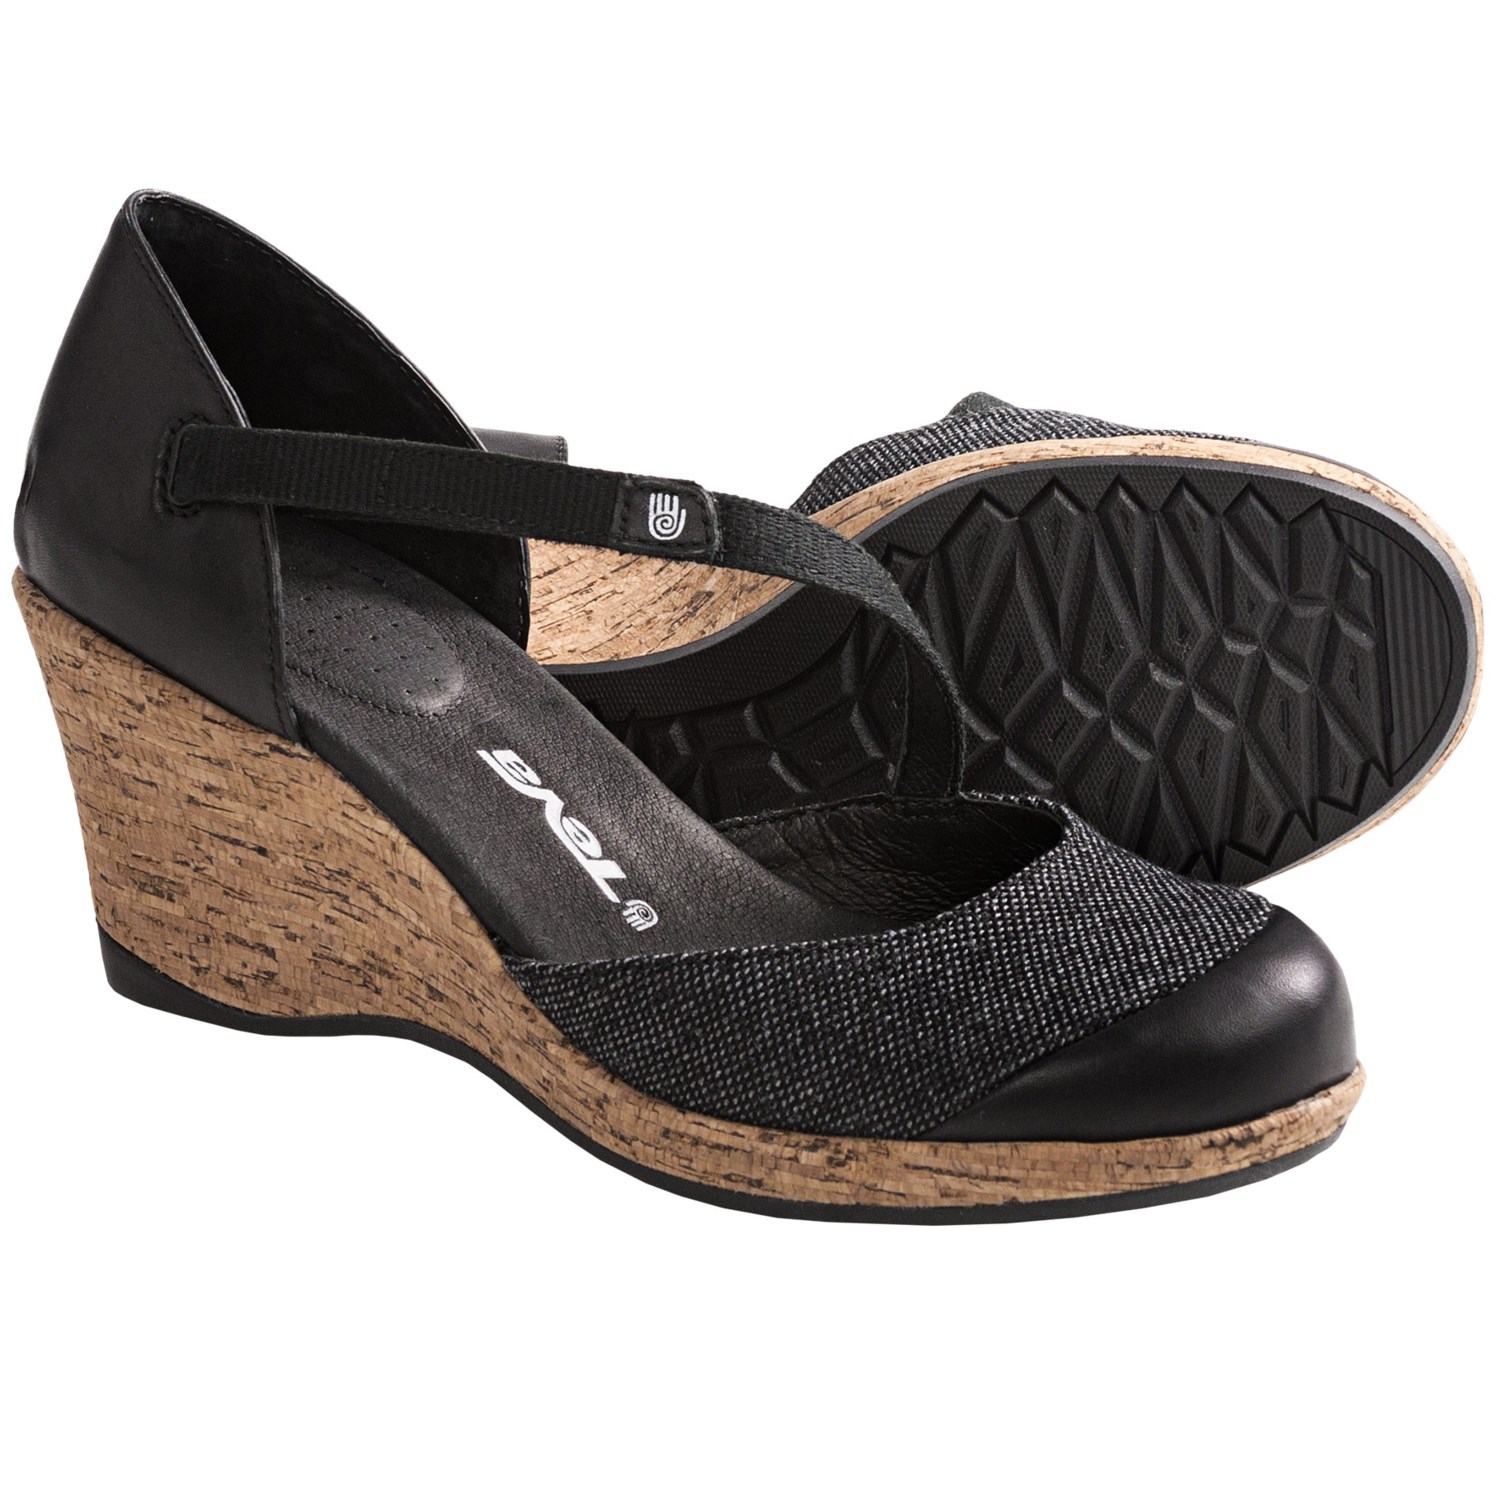 Teva Riviera Wedge MJ Shoes - Leather (For Women) - Save 35%